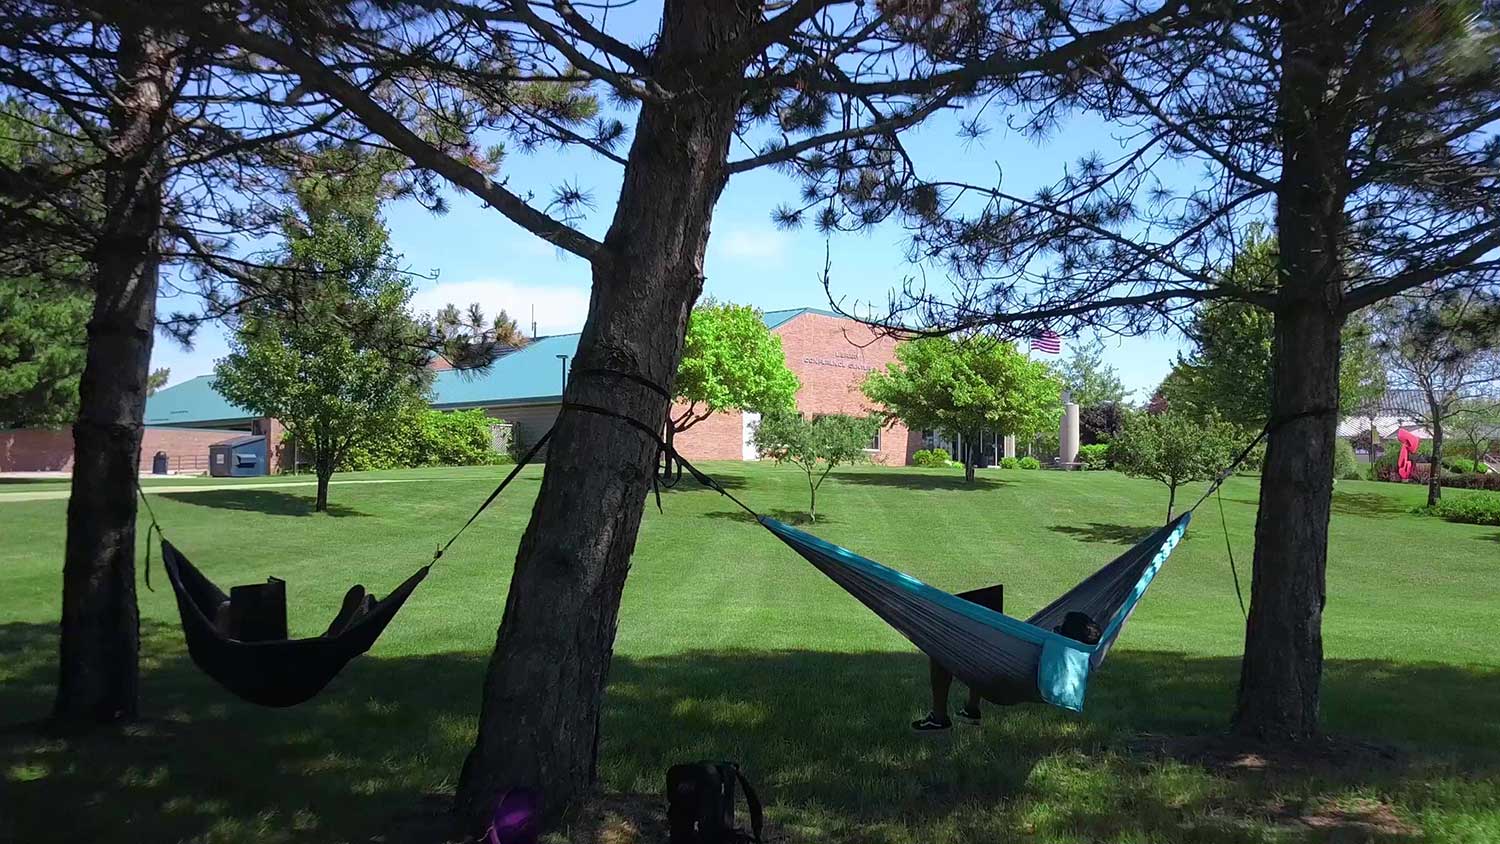 Students relaxing in hammocks on campus